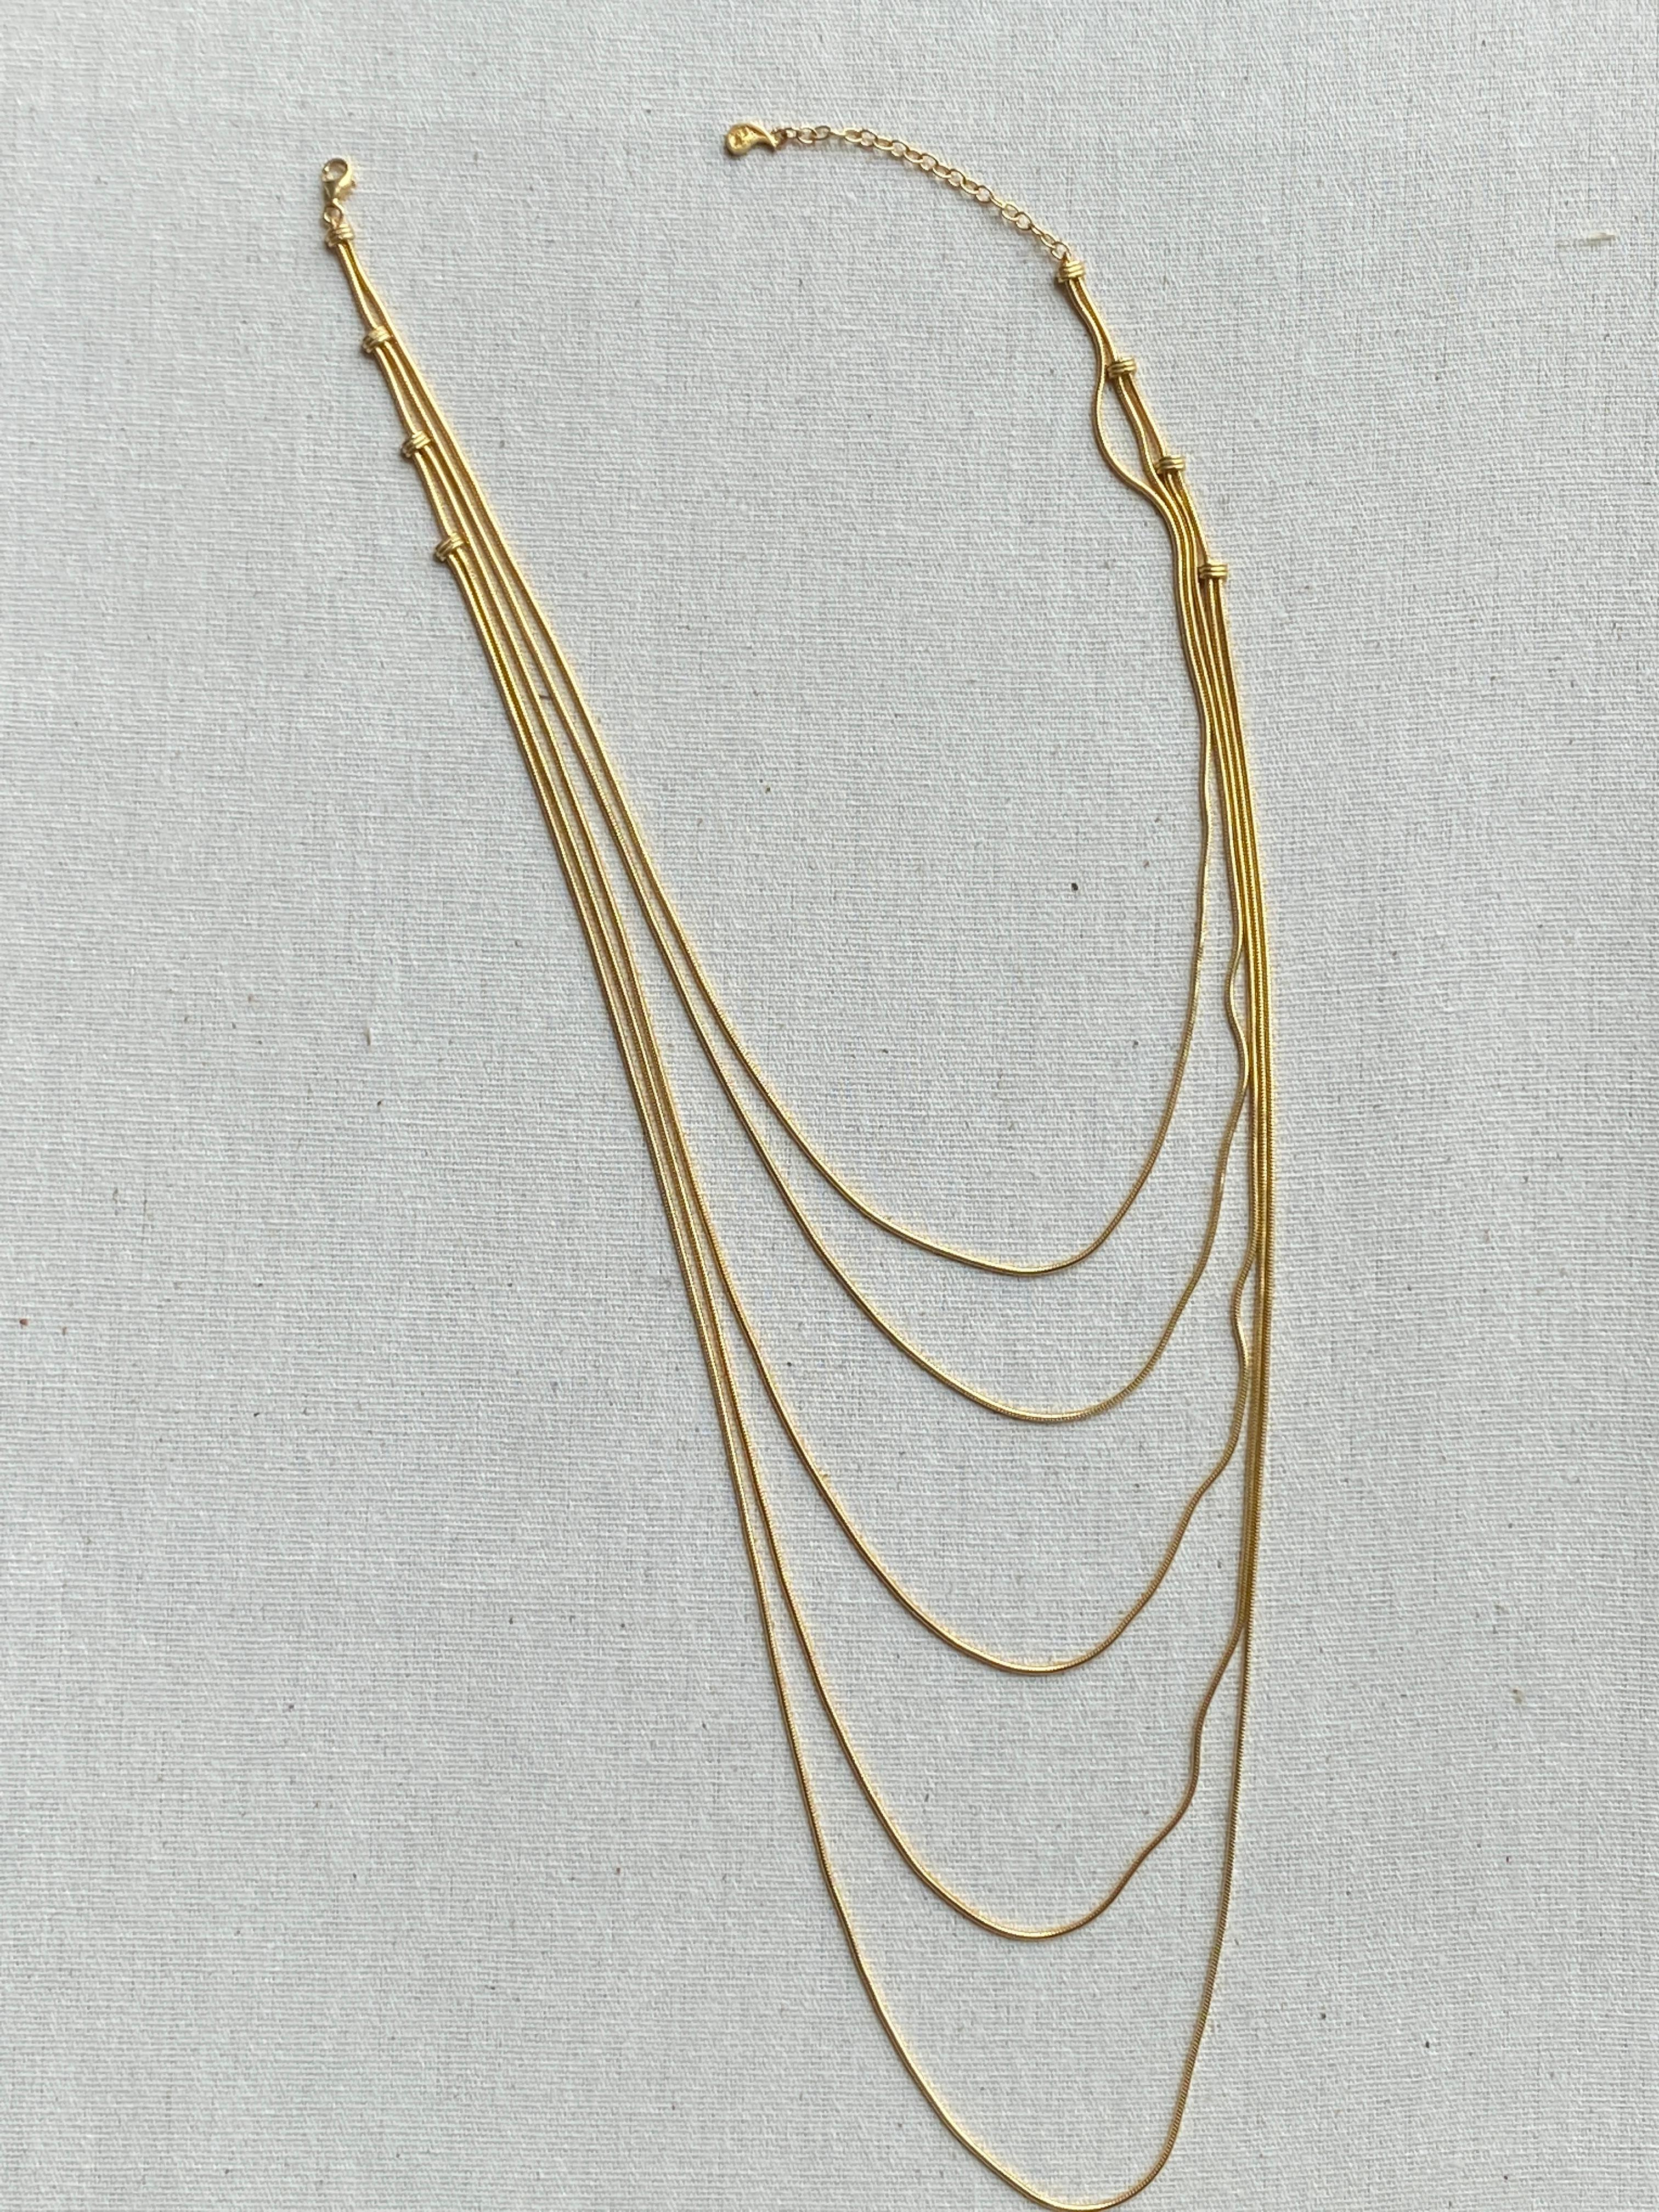 Necklace Snake Chain Minimal Long Movement 18K Gold-Plated Silver Greek Jewelry For Sale 5